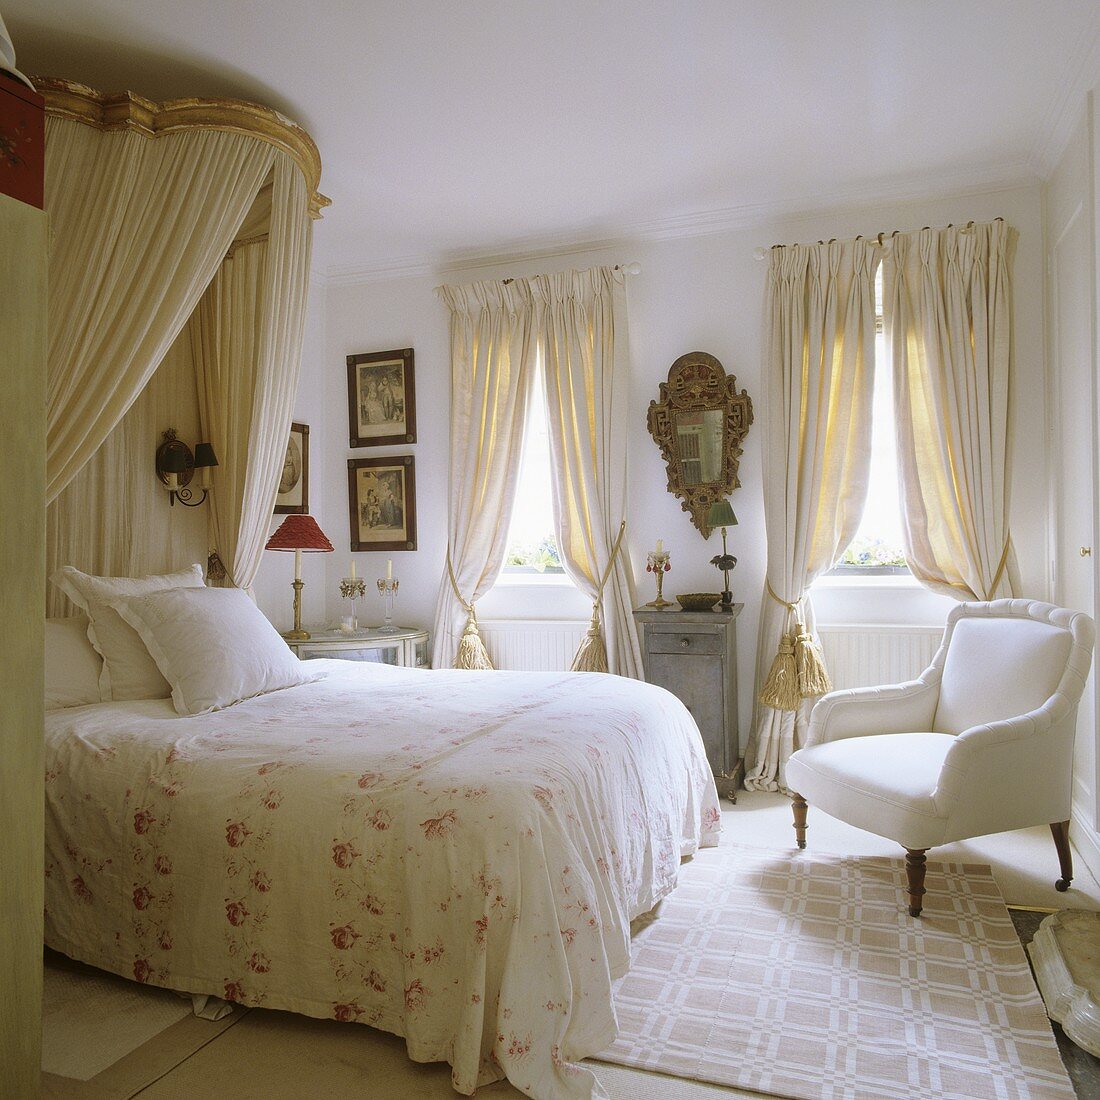 A double bed with a canopy and an antique armchair in a white bedroom